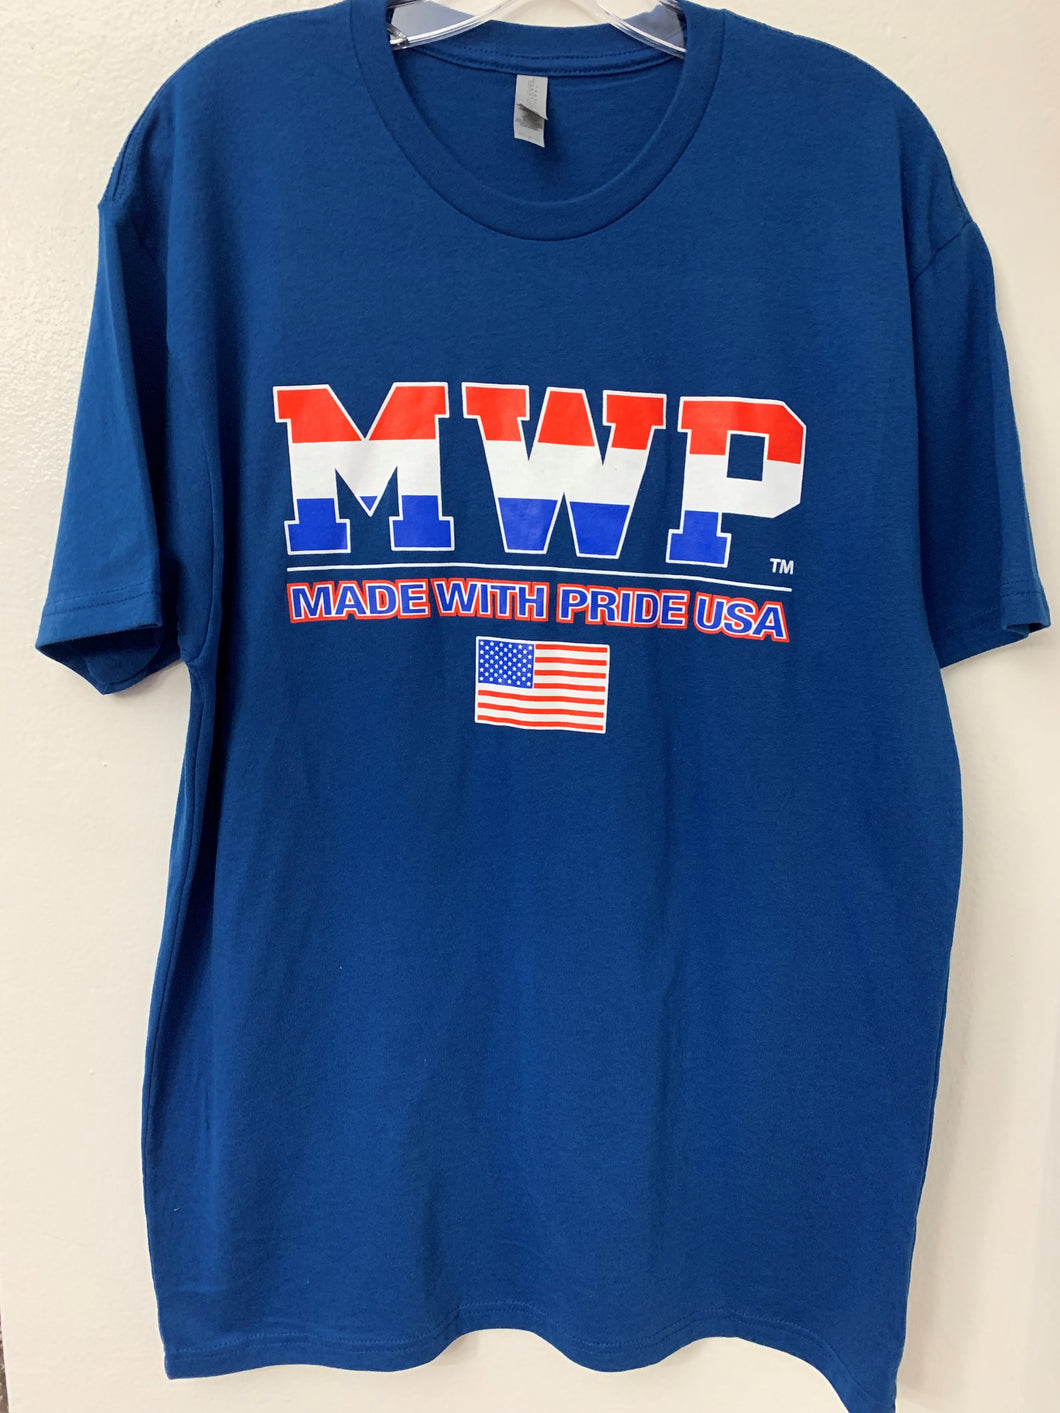 MEN'S MWP (MADE WITH PRIDE USA) T-Shirt